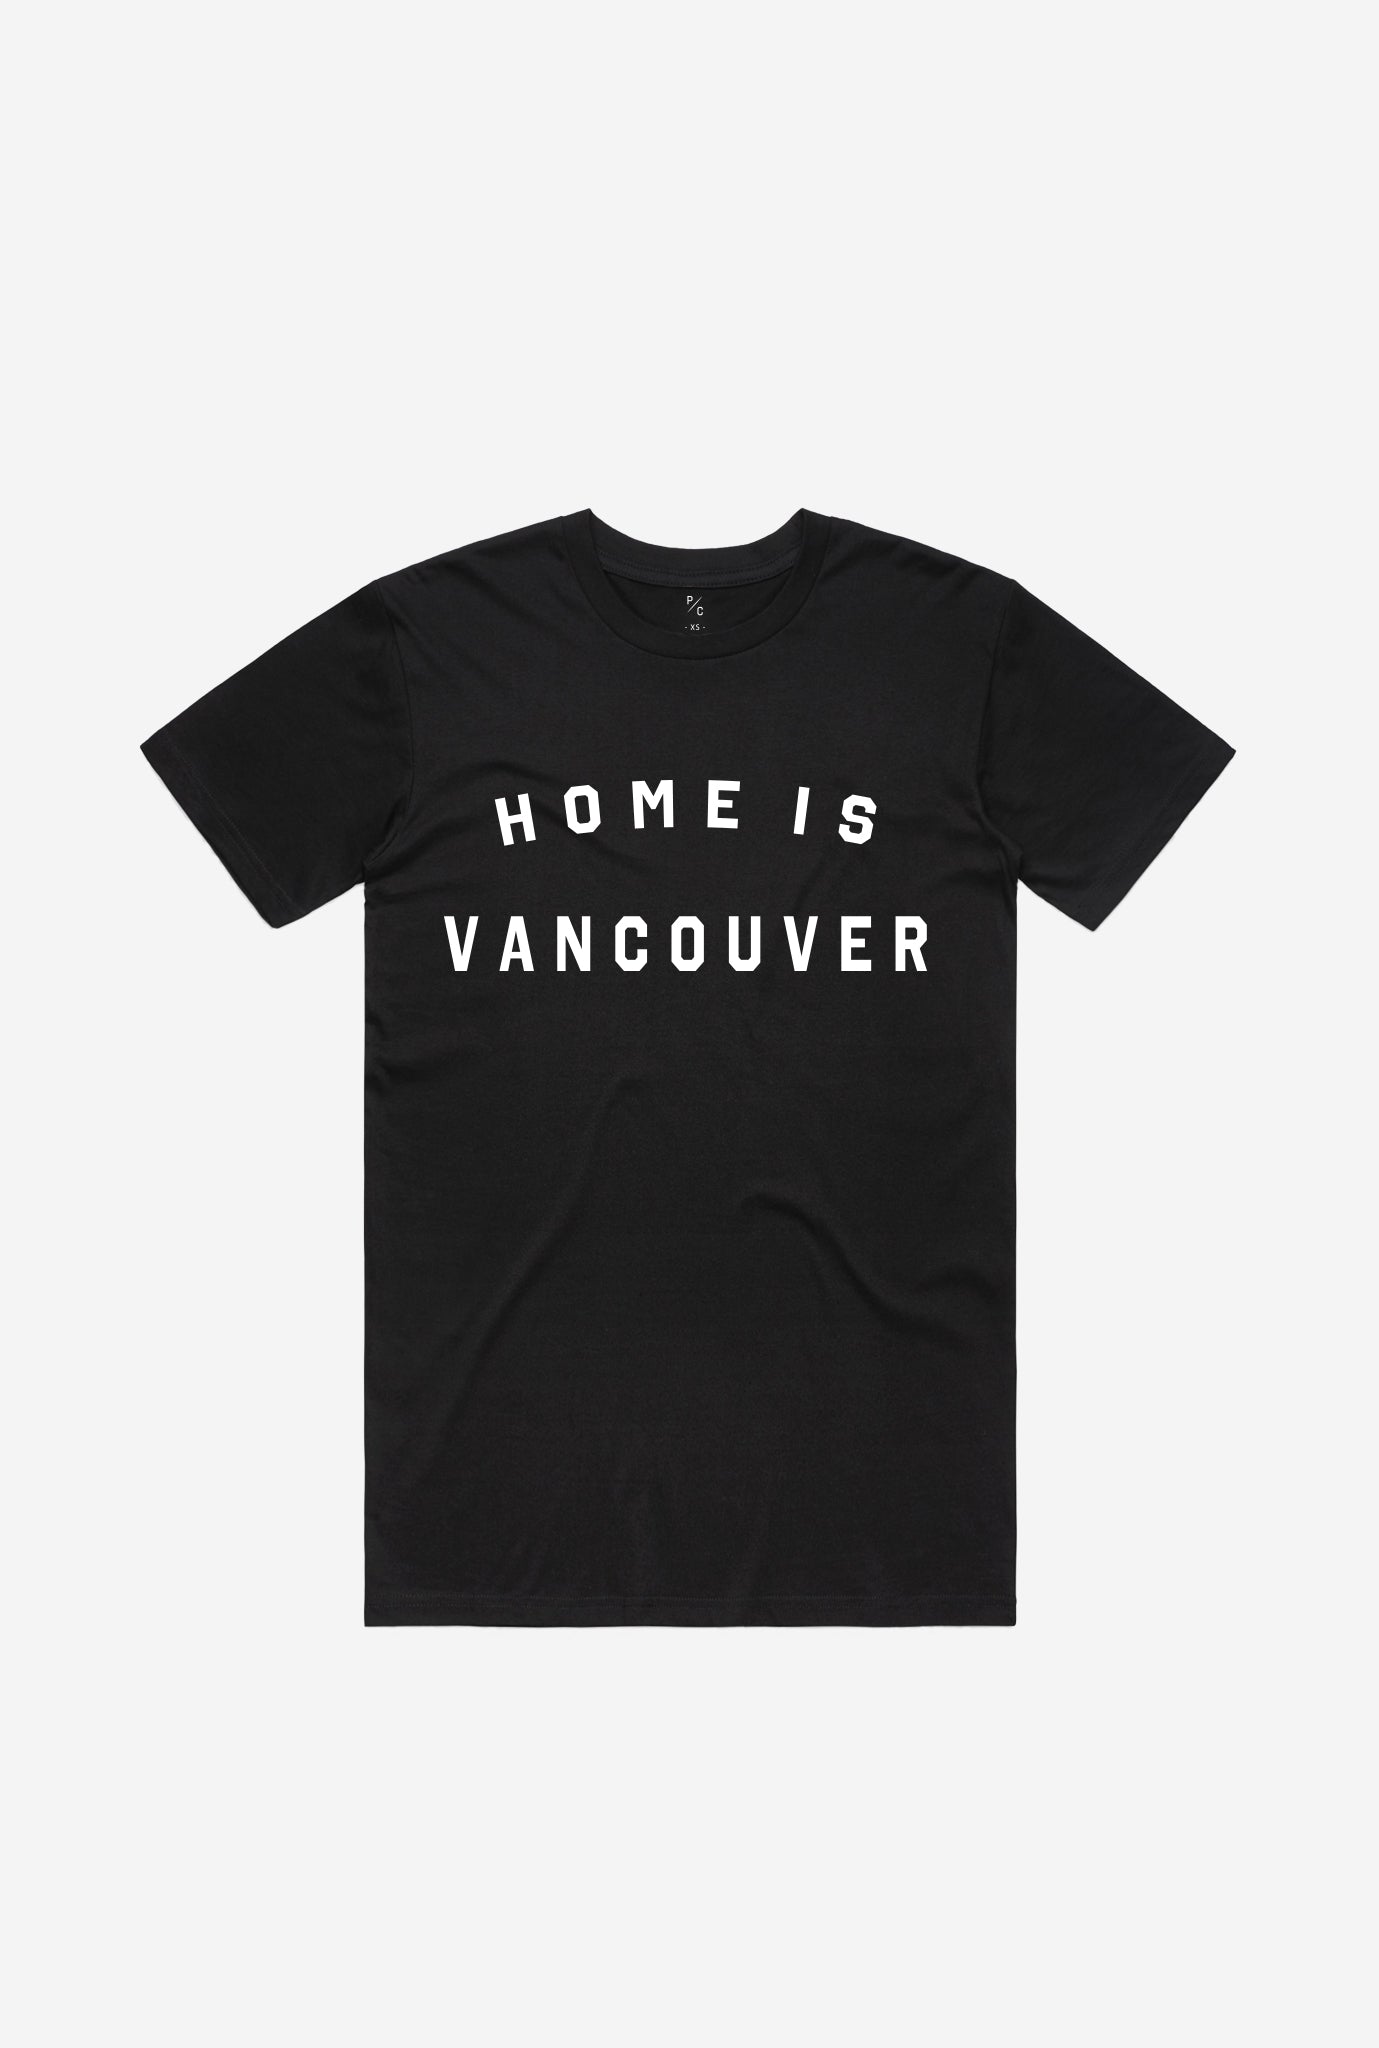 Home is Vancouver T-Shirt - Black